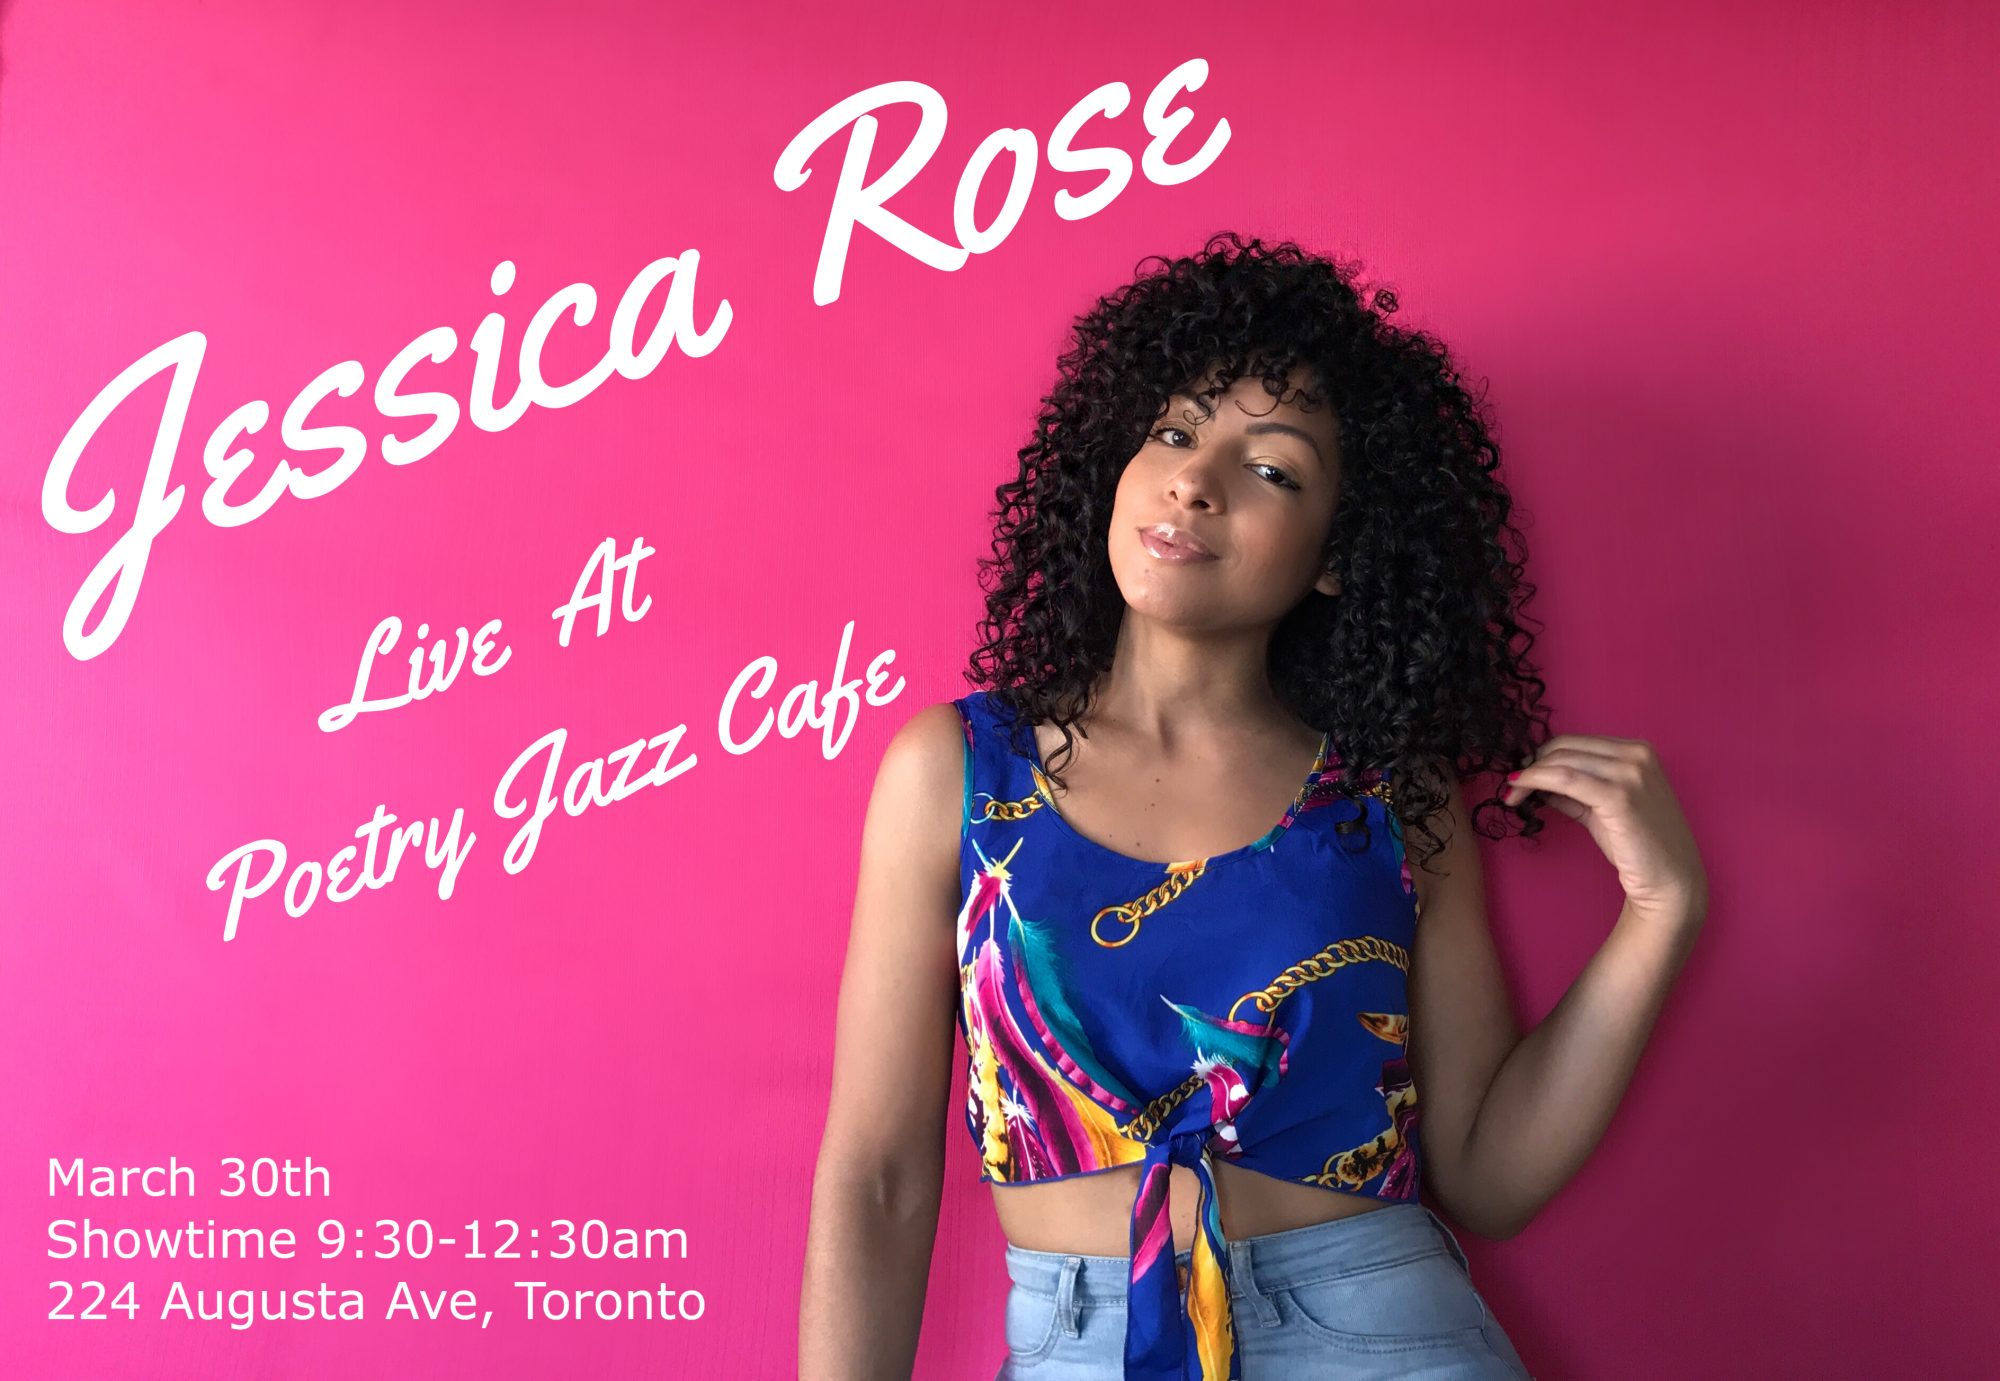 Performing Live At Poetry Jazz Cafe